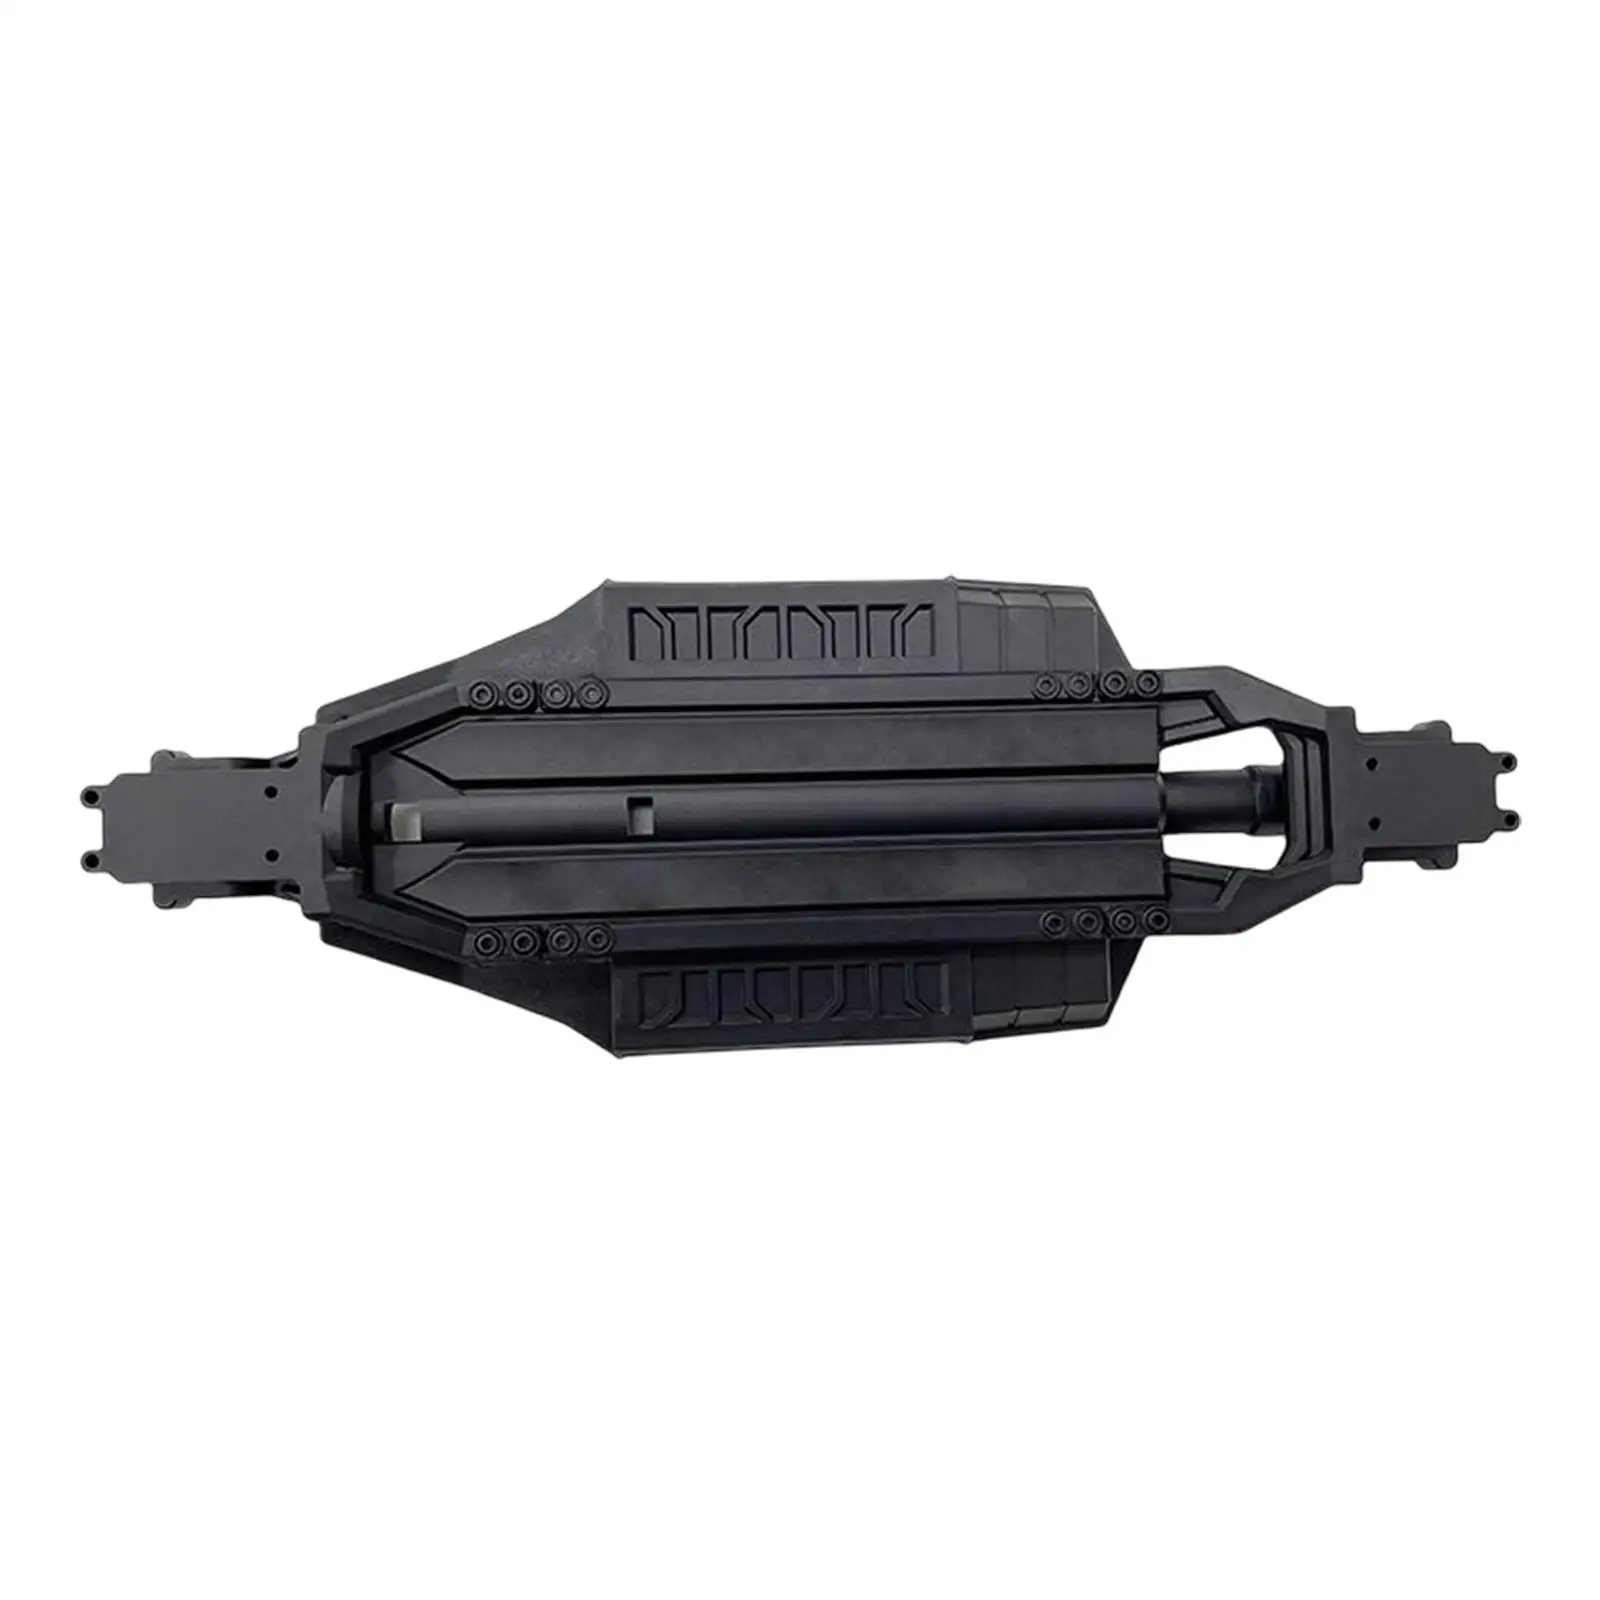 

Metal Remote Control Car Chassis Premium Stable Carrier for Xlh 901 901A 903 903A 905 905A Direct Replace Accessory Spare Parts